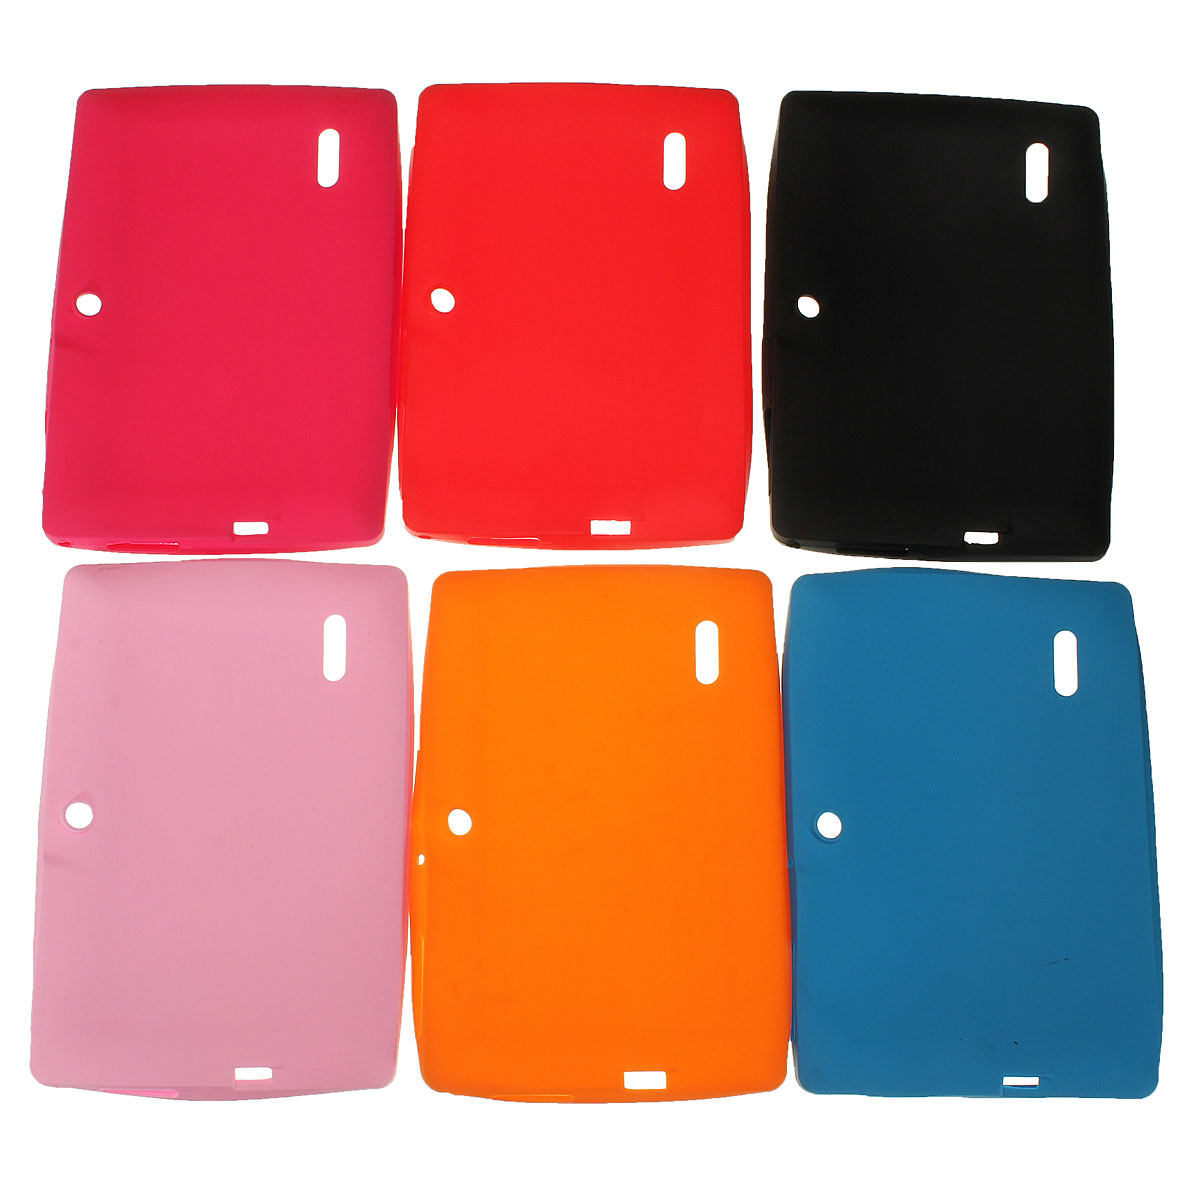 Multi-color Soft Silicone Protective Back Cover Case For 7 Inch Tablet PC